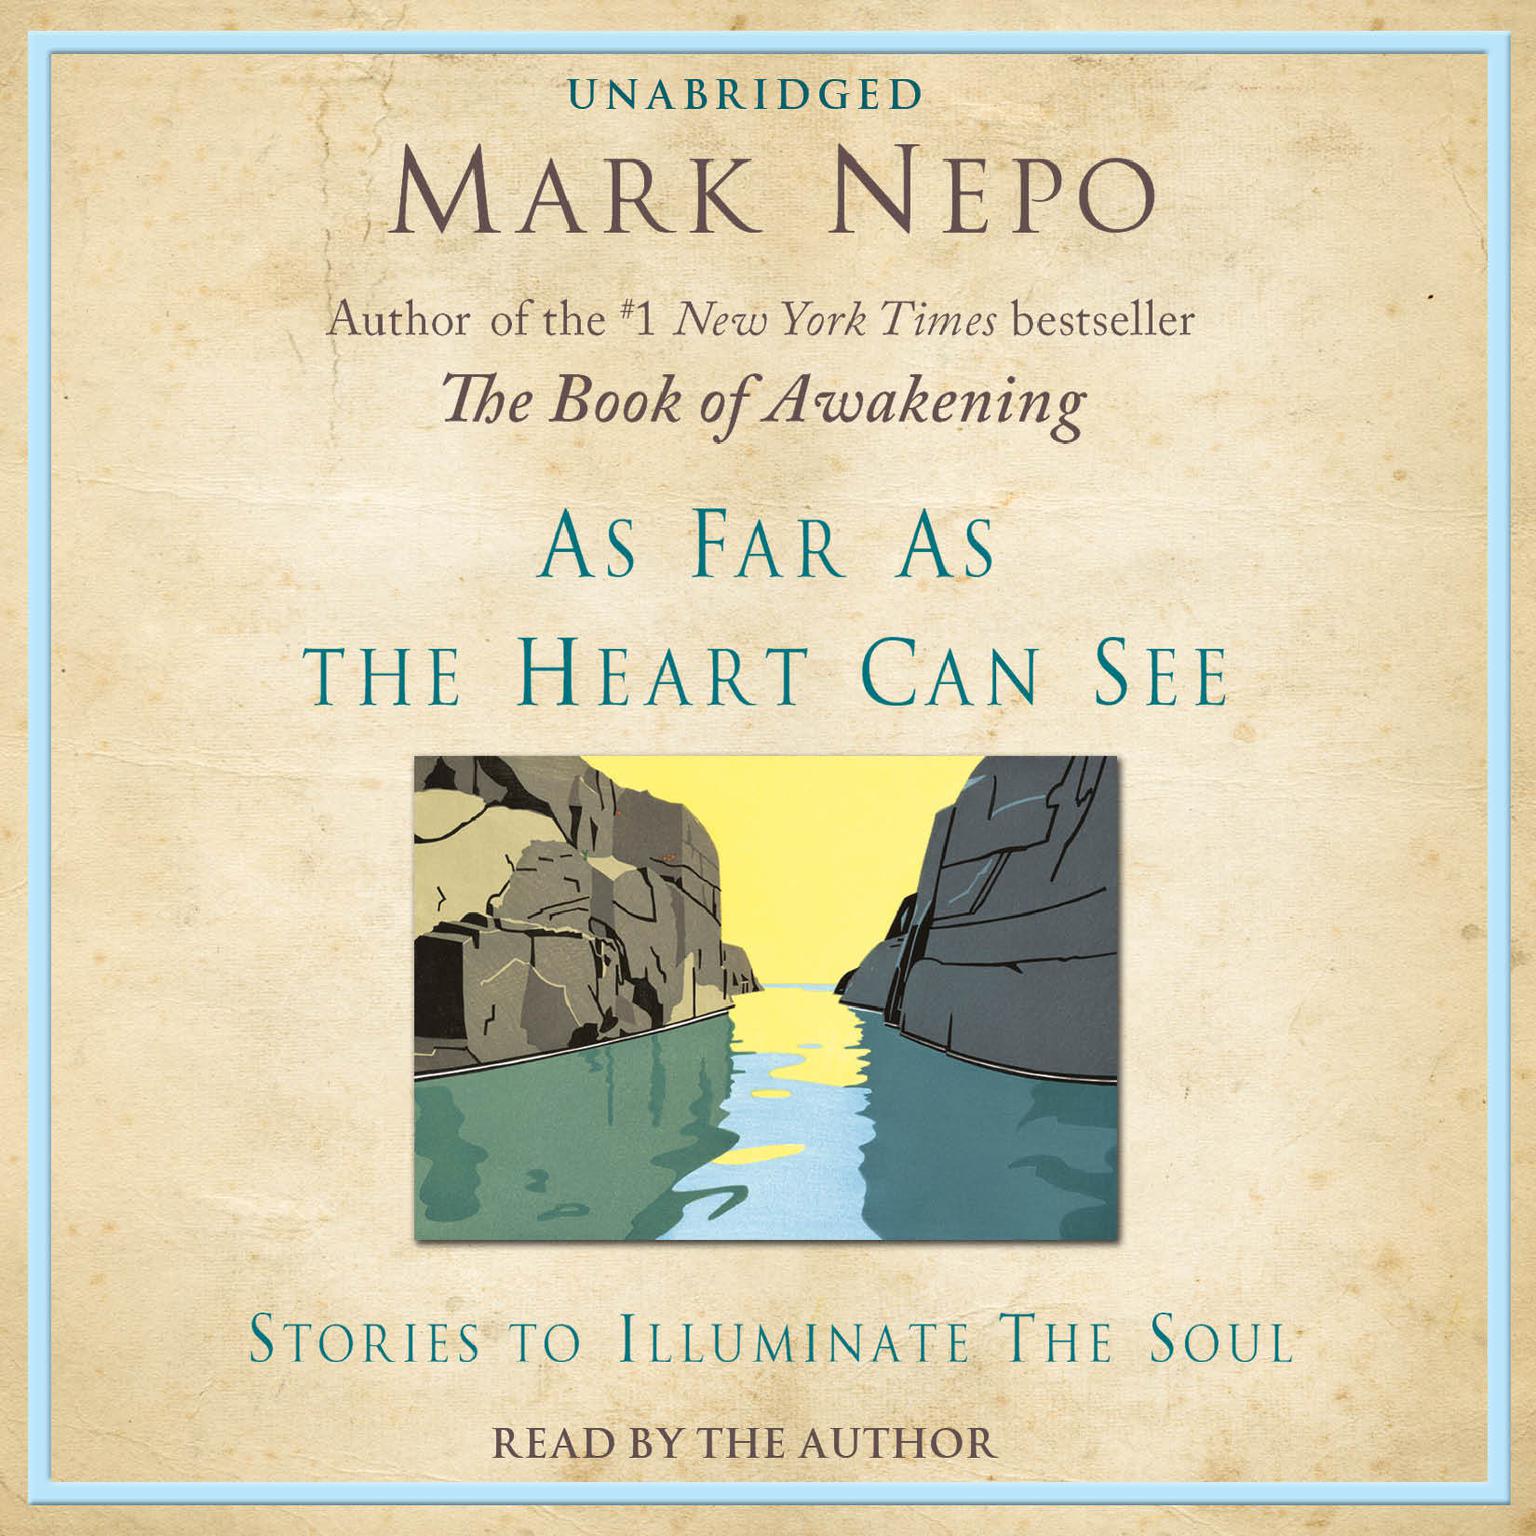 As Far As The Heart Can See: Stories to Illuminate the Soul Audiobook, by Mark Nepo